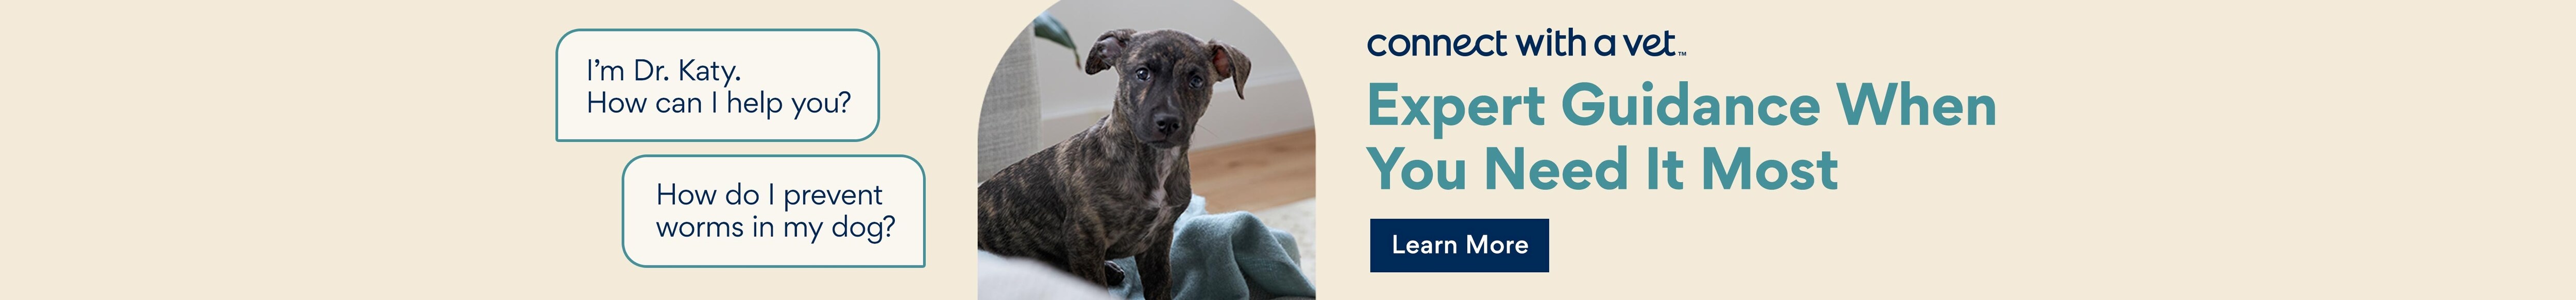 Connect with a Vet. Expert guidance when you need it most. Learn More.